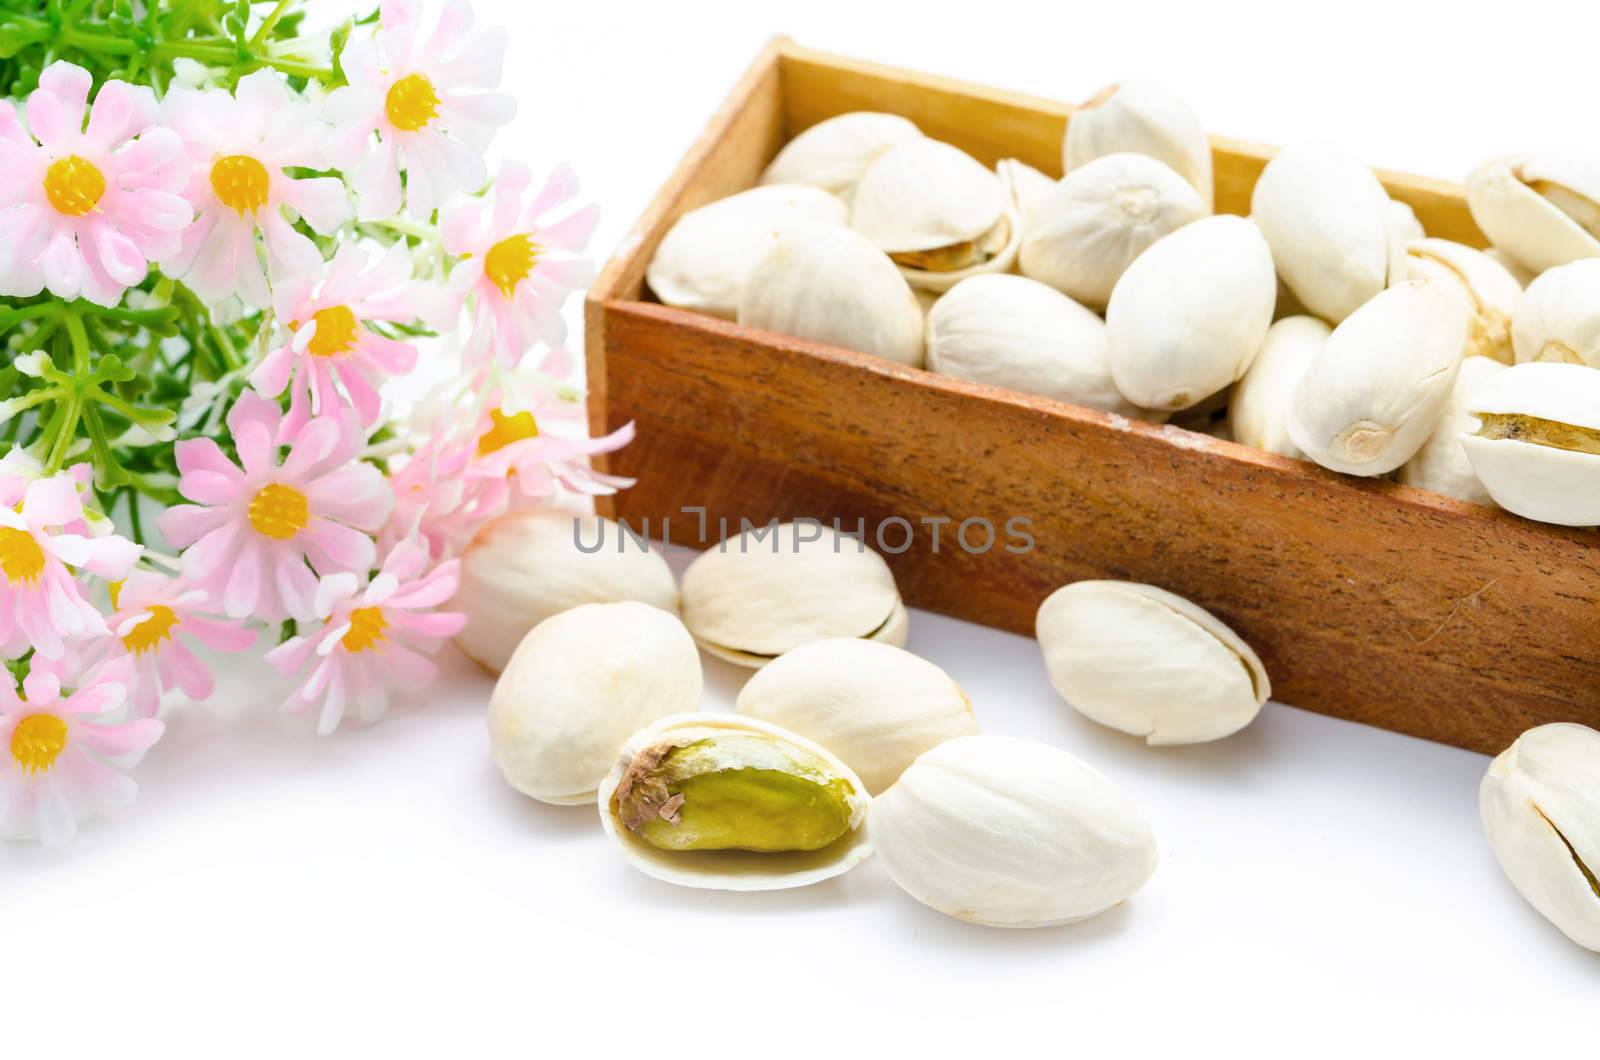 Pistachio nuts in wooden box with flower on a white background.